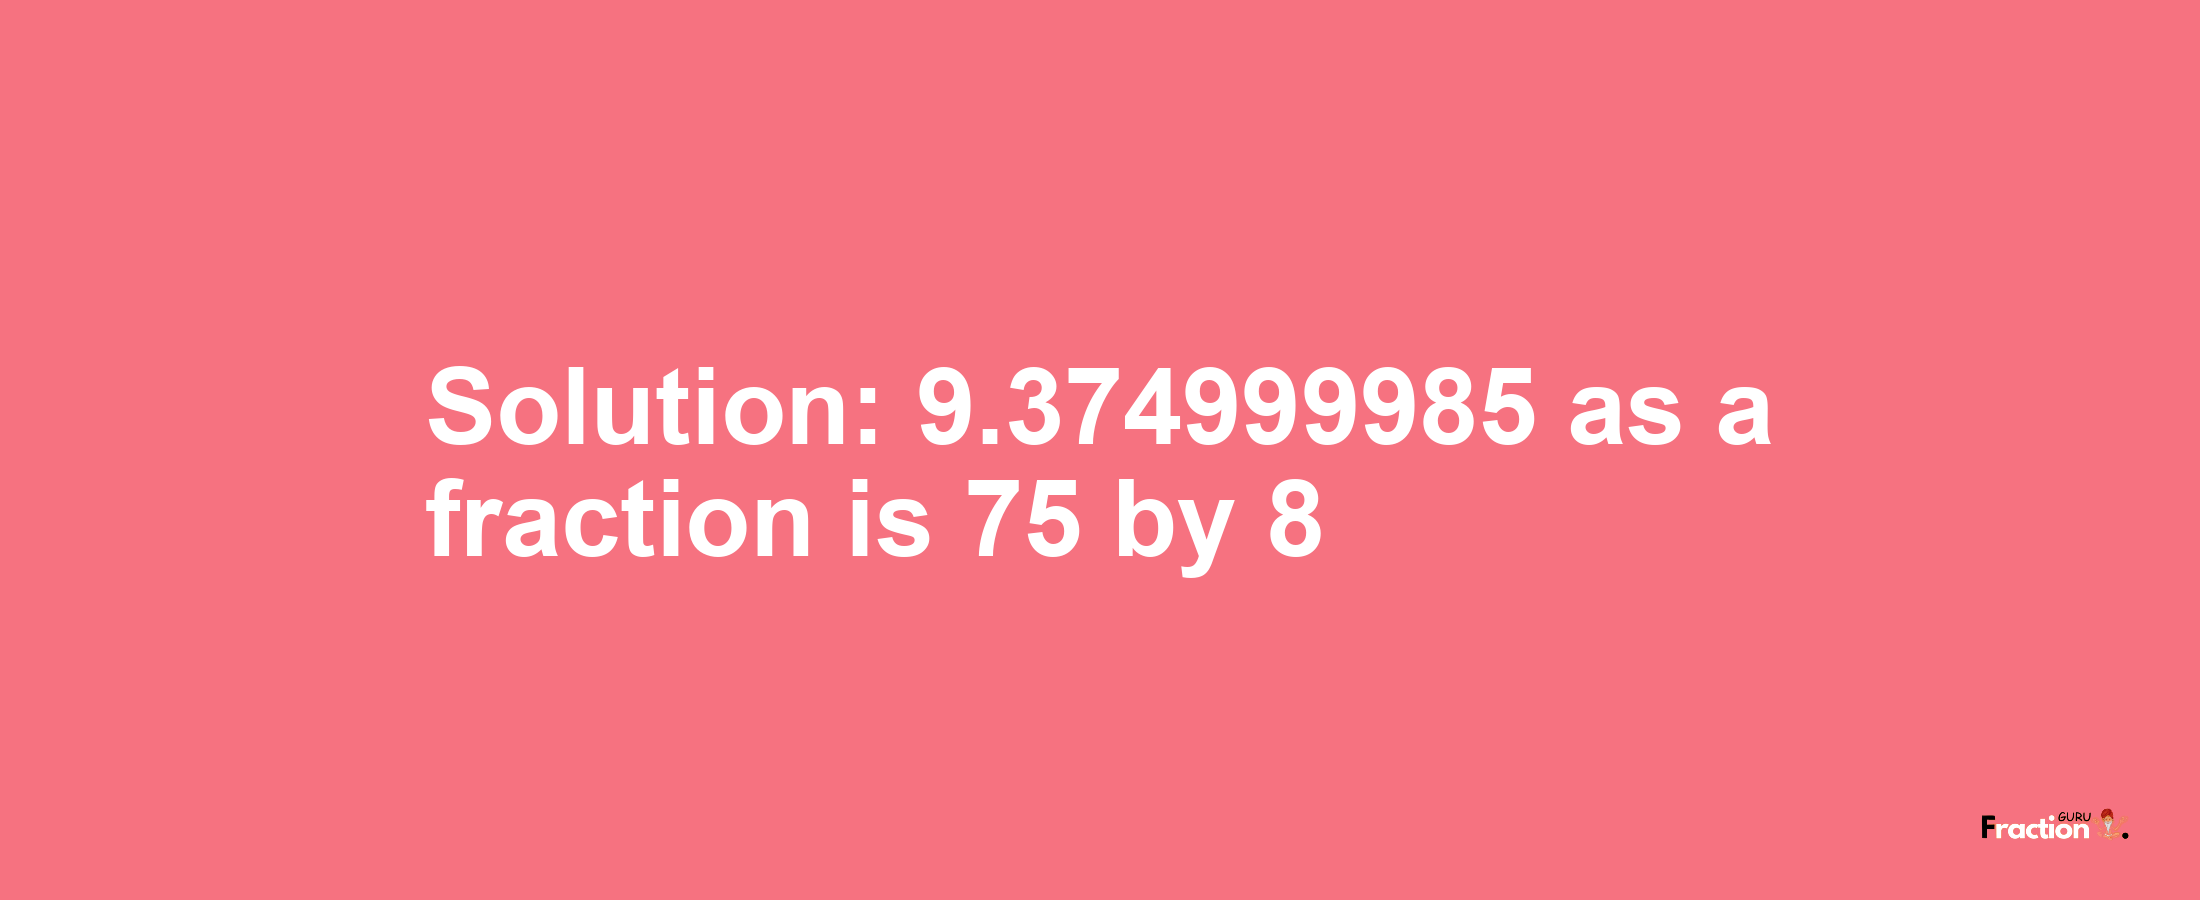 Solution:9.374999985 as a fraction is 75/8